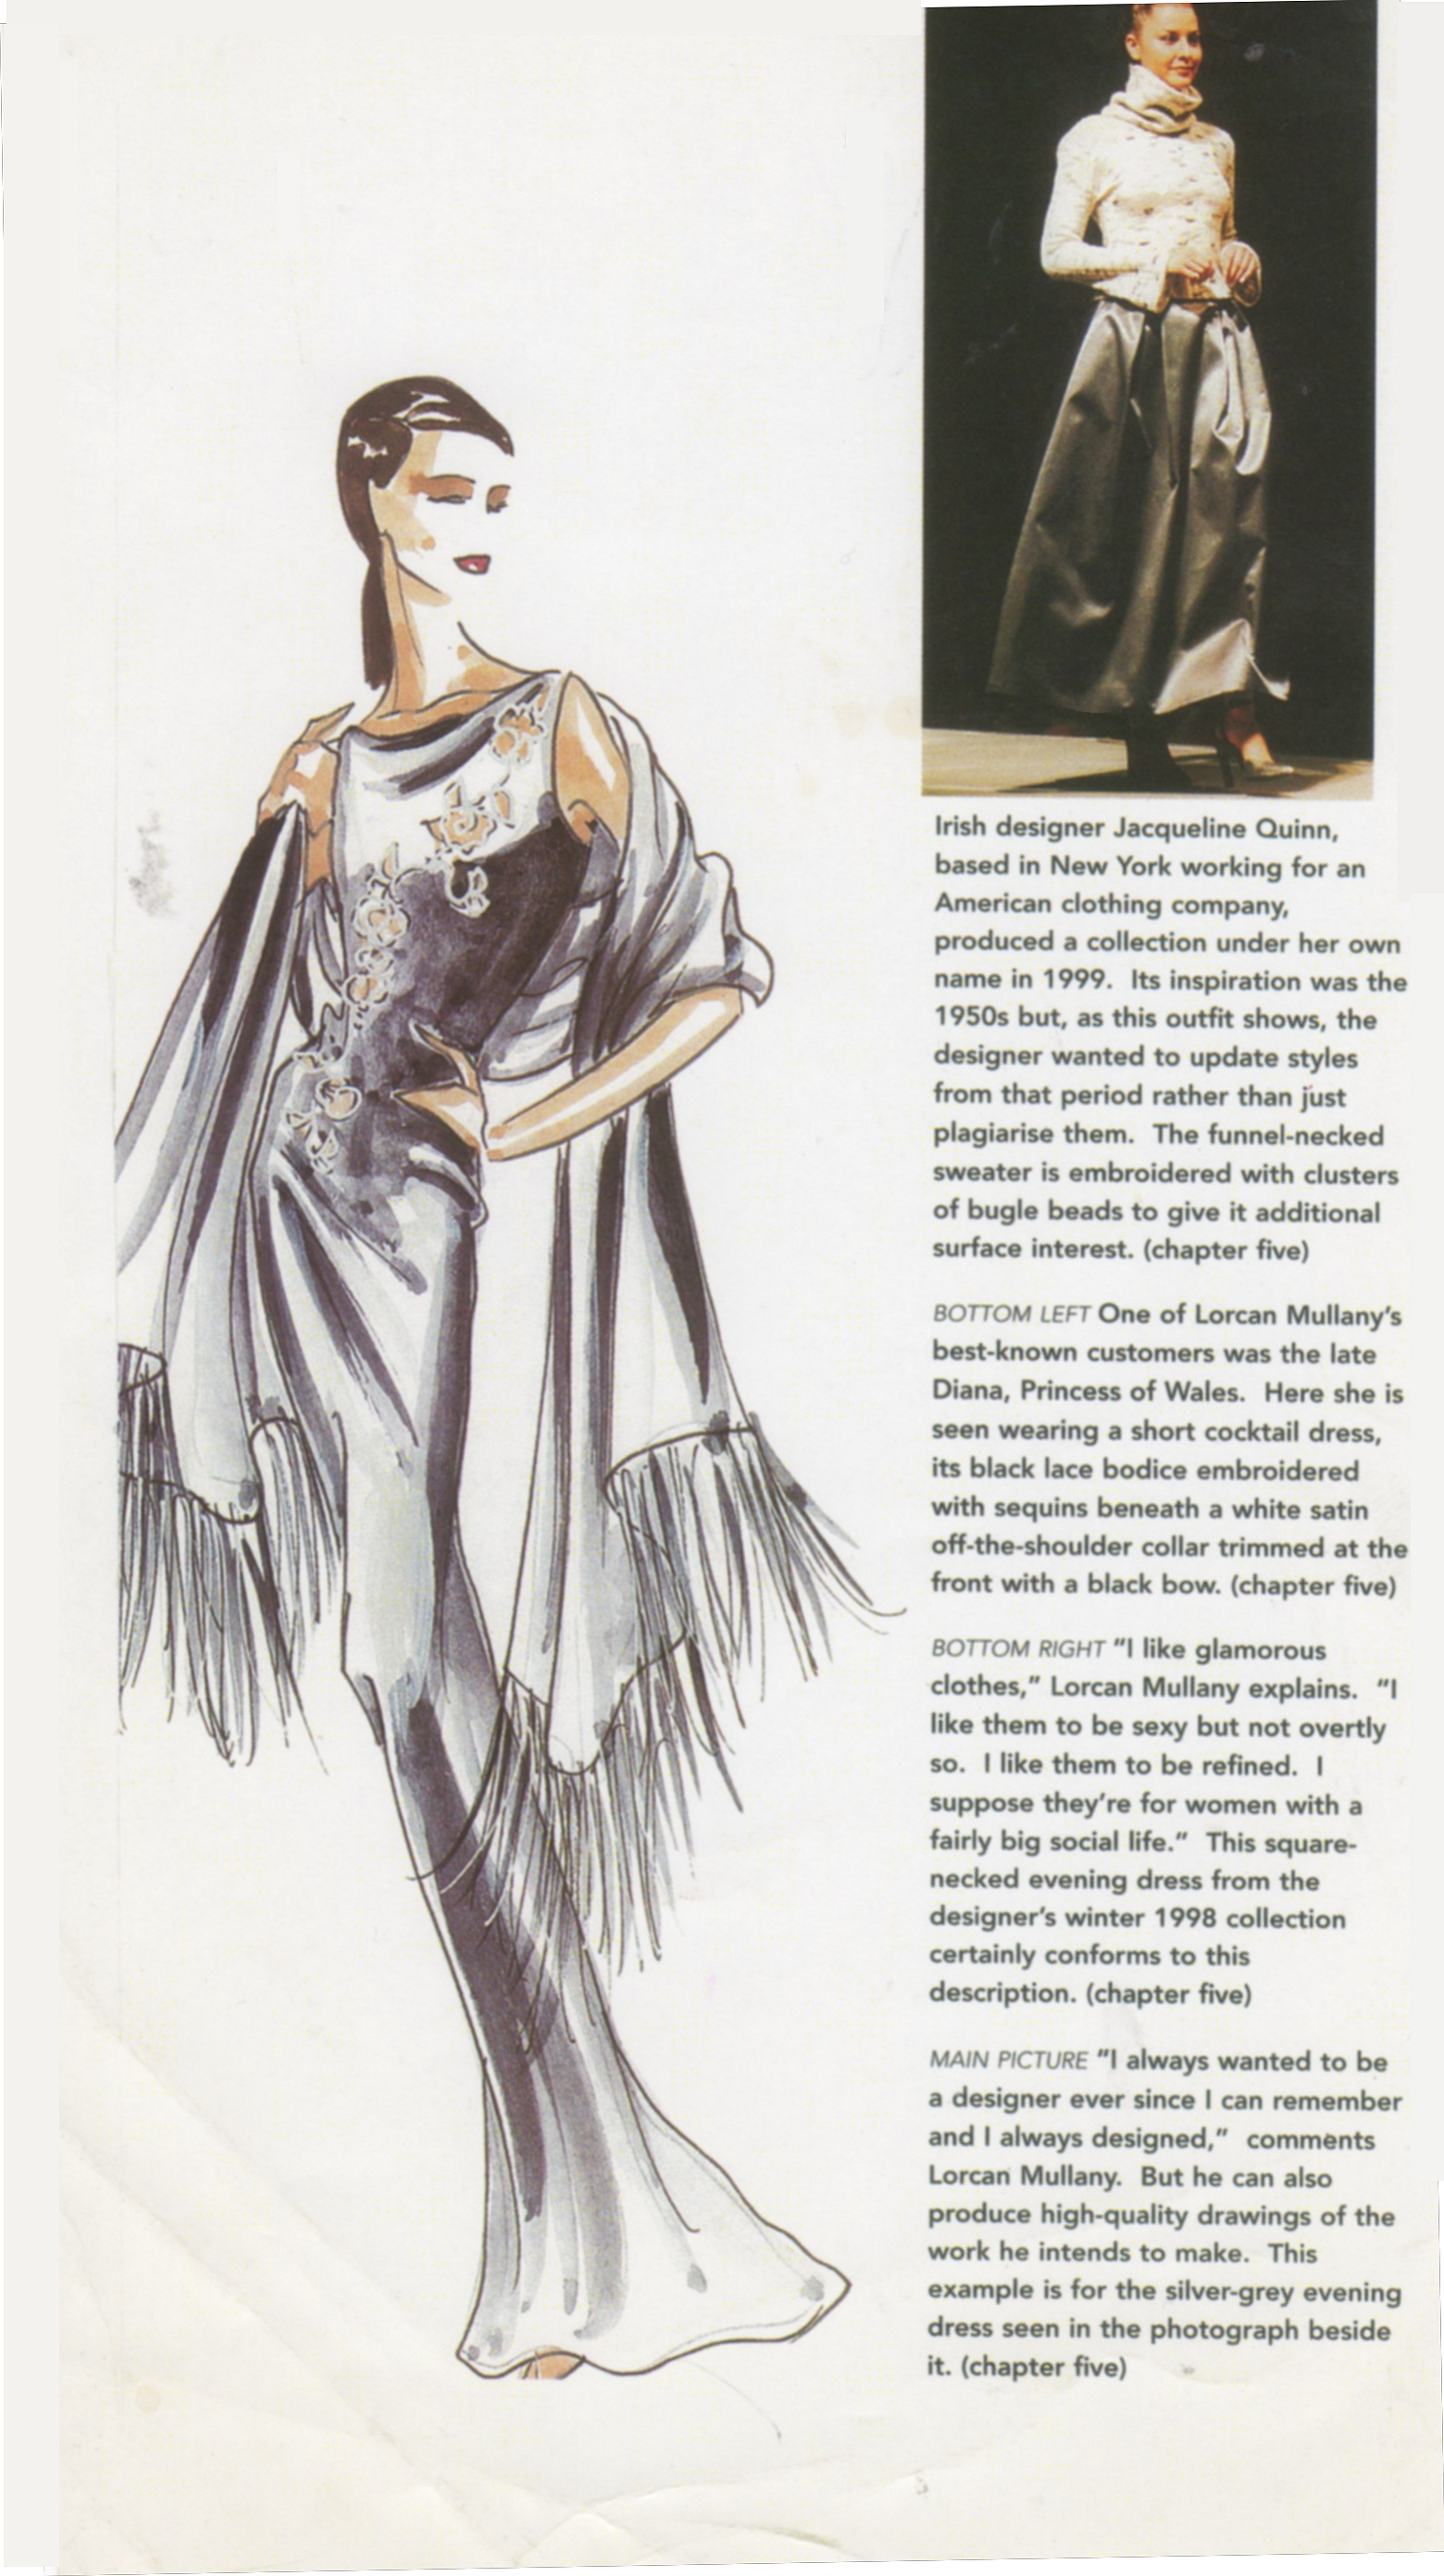 JACQUELINE QUINN FEATURED IN THE BOOK “AFTER A FASHION” BY ROBERT BYRNE